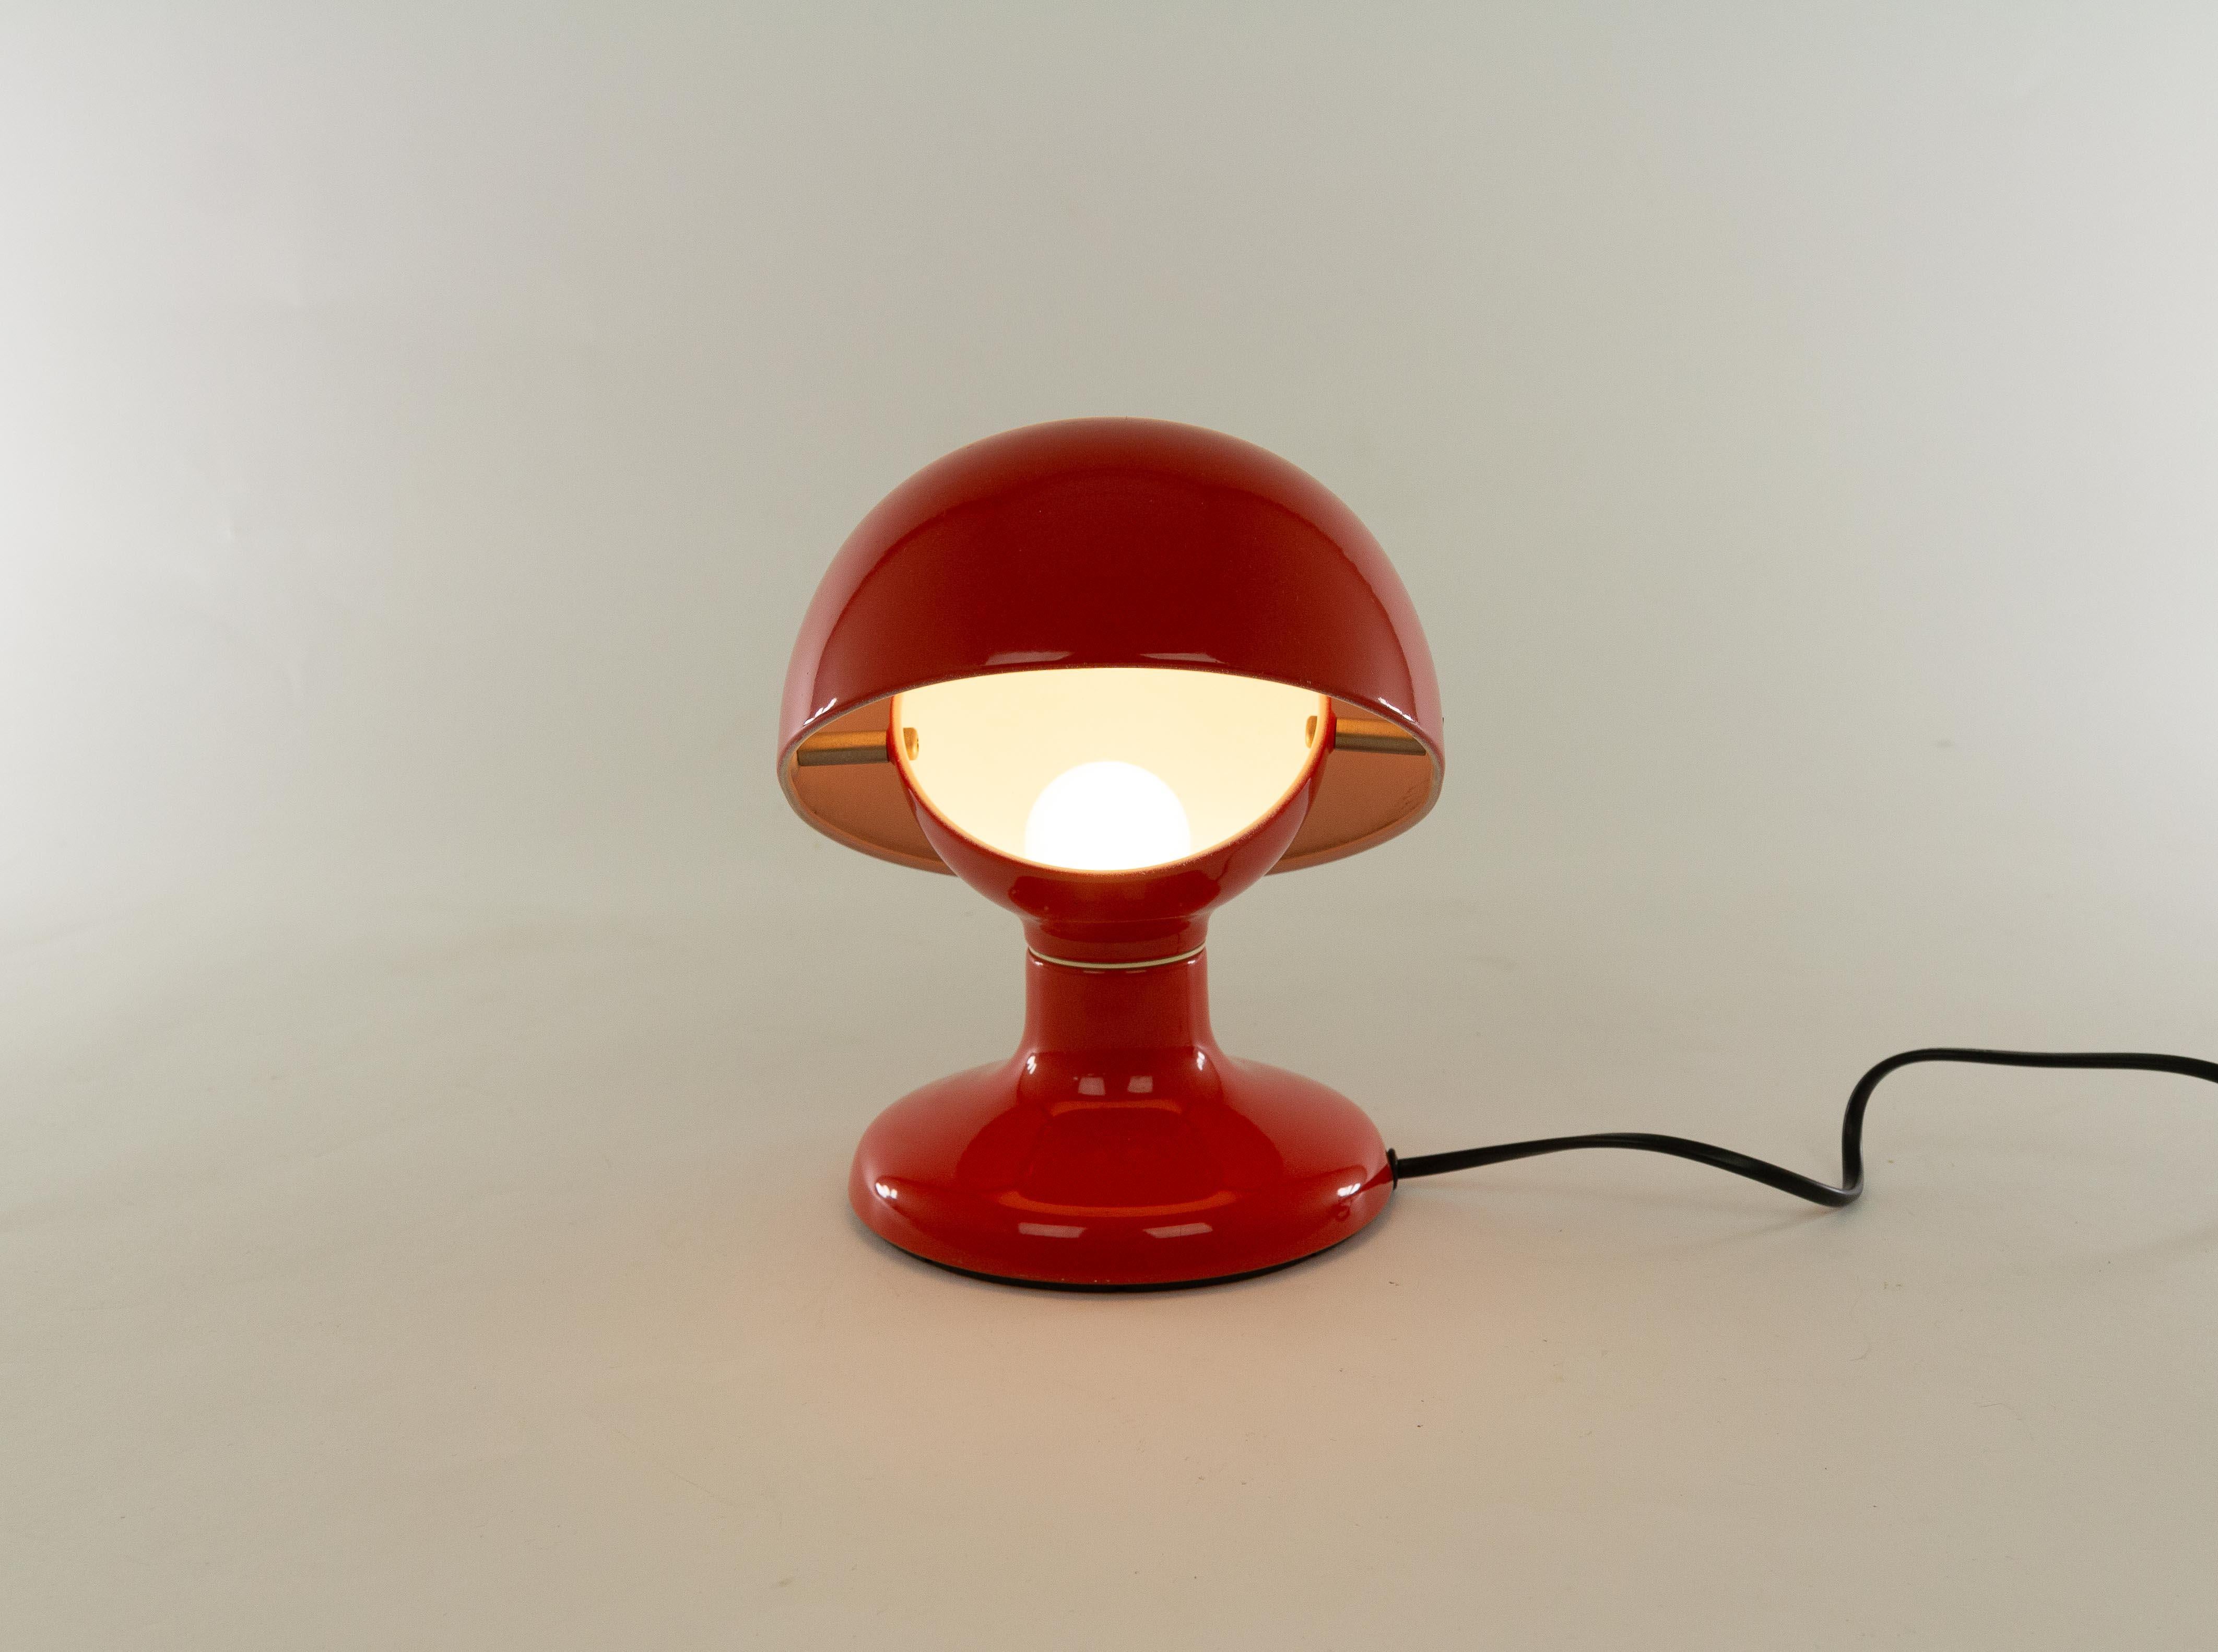 Lacquered Jucker Table Lamp by Tobia Scarpa for Flos, 1963